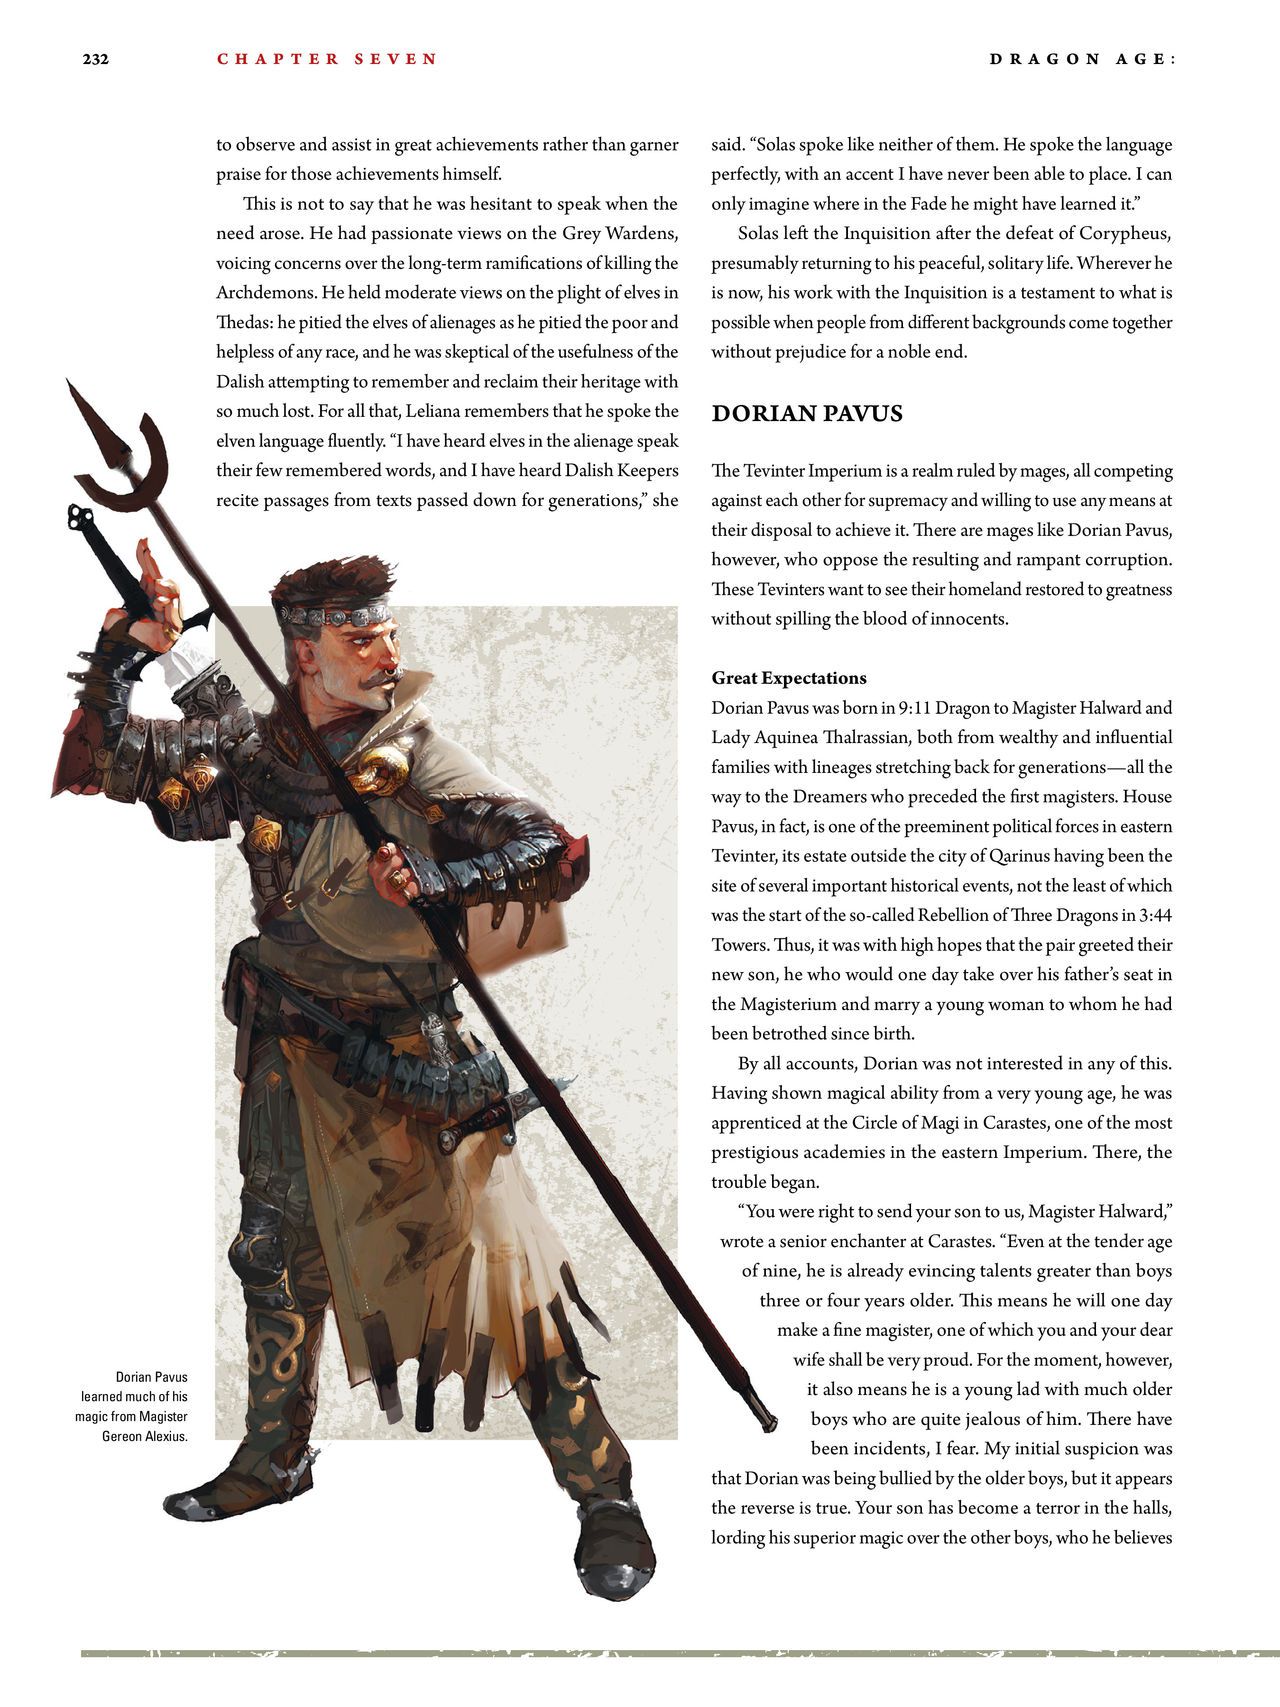 Dragon Age - The World of Thedas v02 227